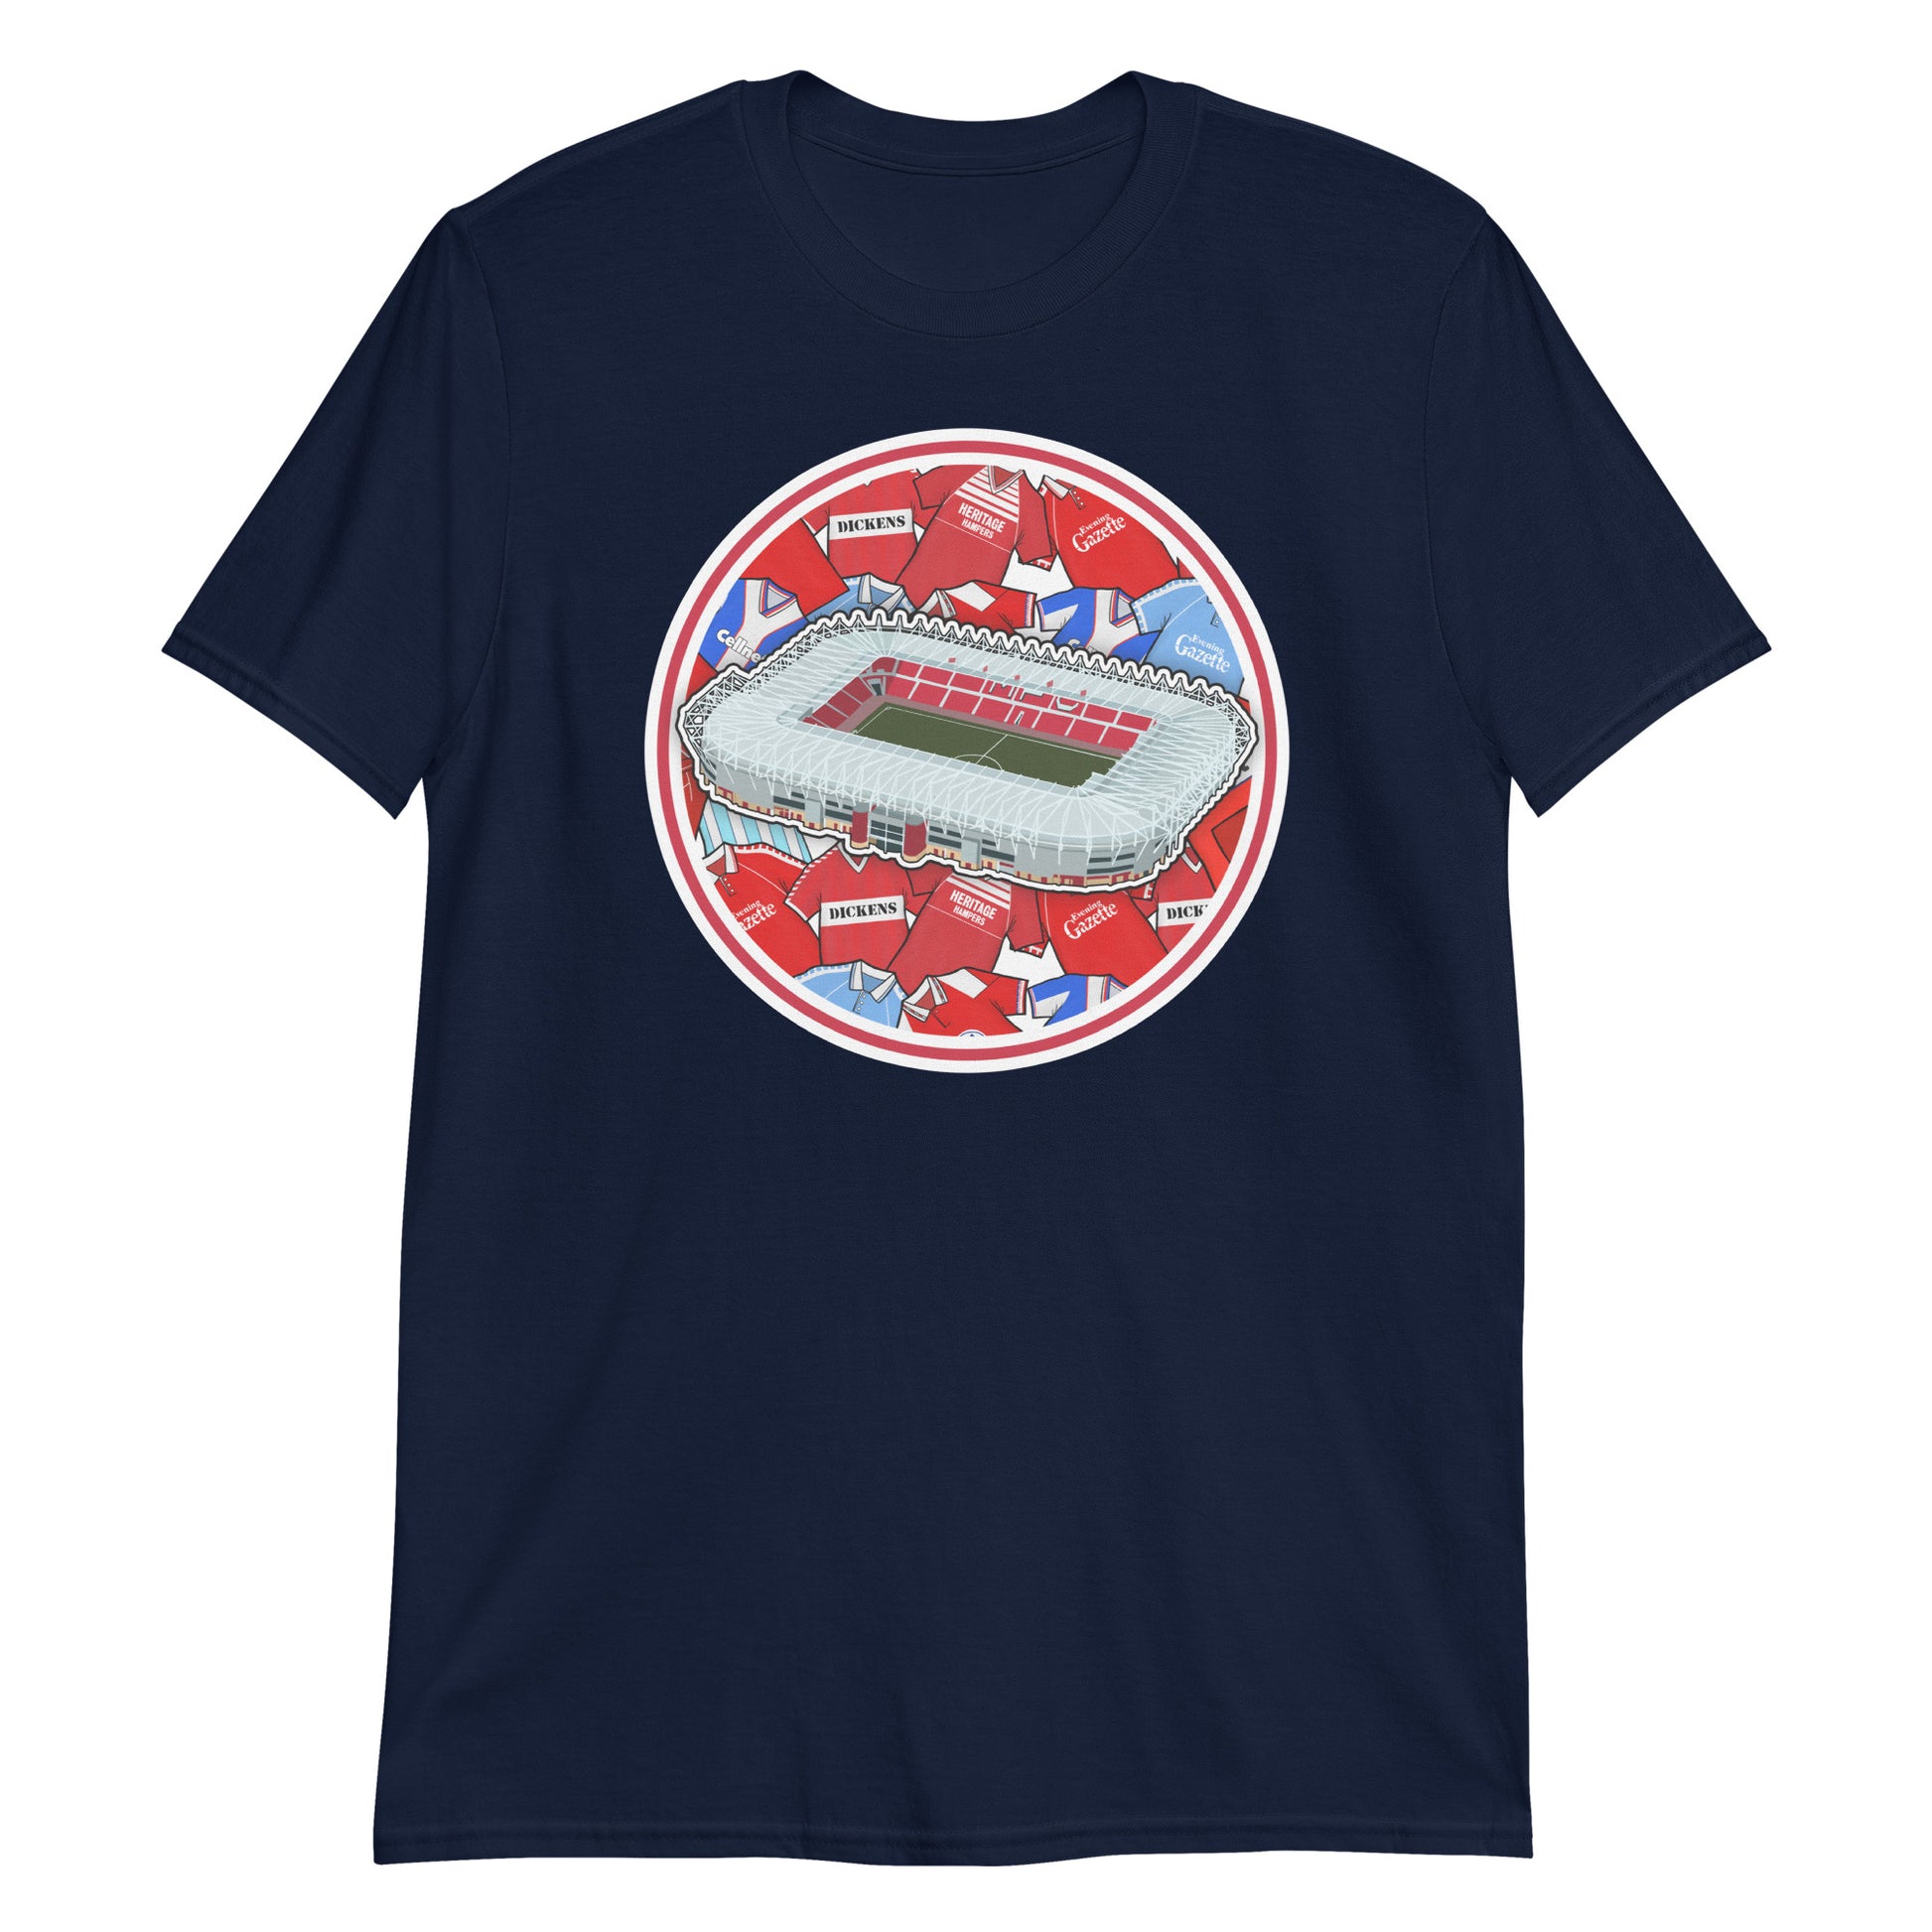 Navy Blue  Middlesbrough themed T-shirt with illustrated retro art including the Riverside Stadium in North Yorkshire